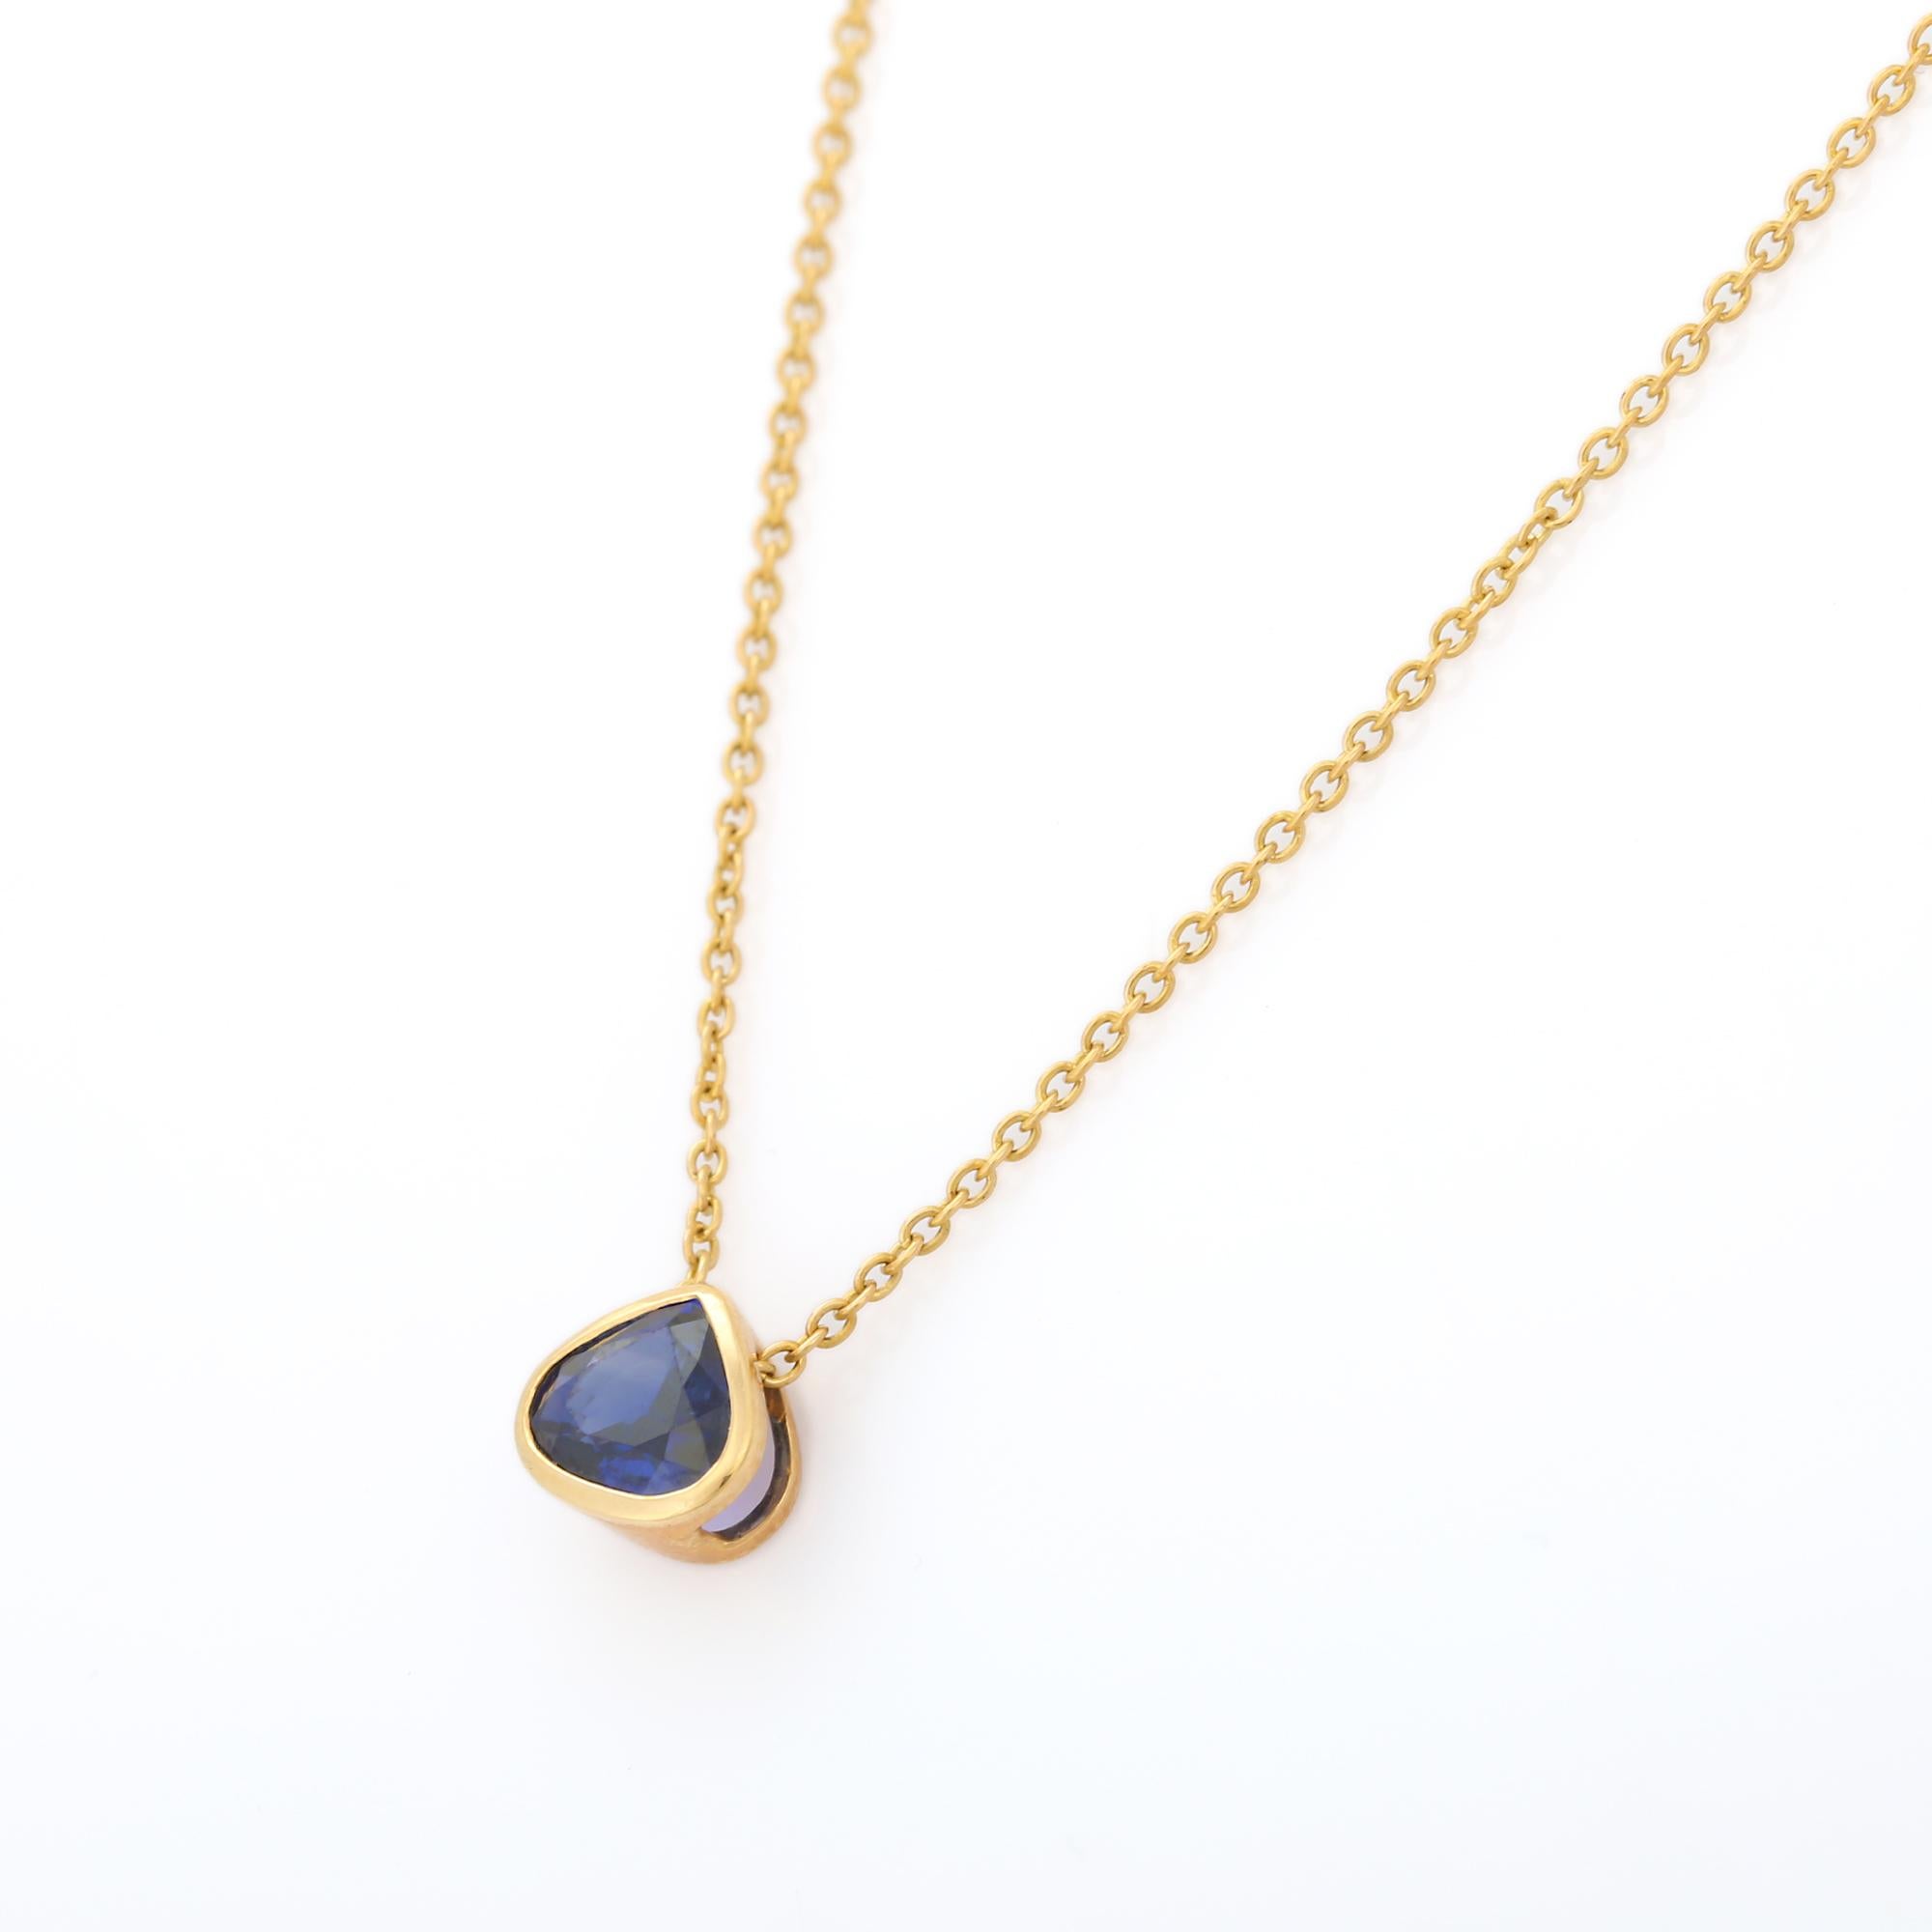 Blue sapphire Necklace in 18K Gold studded with Pear cut sapphires.
Accessorize your look with this elegant sapphire chain necklace. This stunning piece of jewelry instantly elevates a casual look or dressy outfit. Comfortable and easy to wear, it